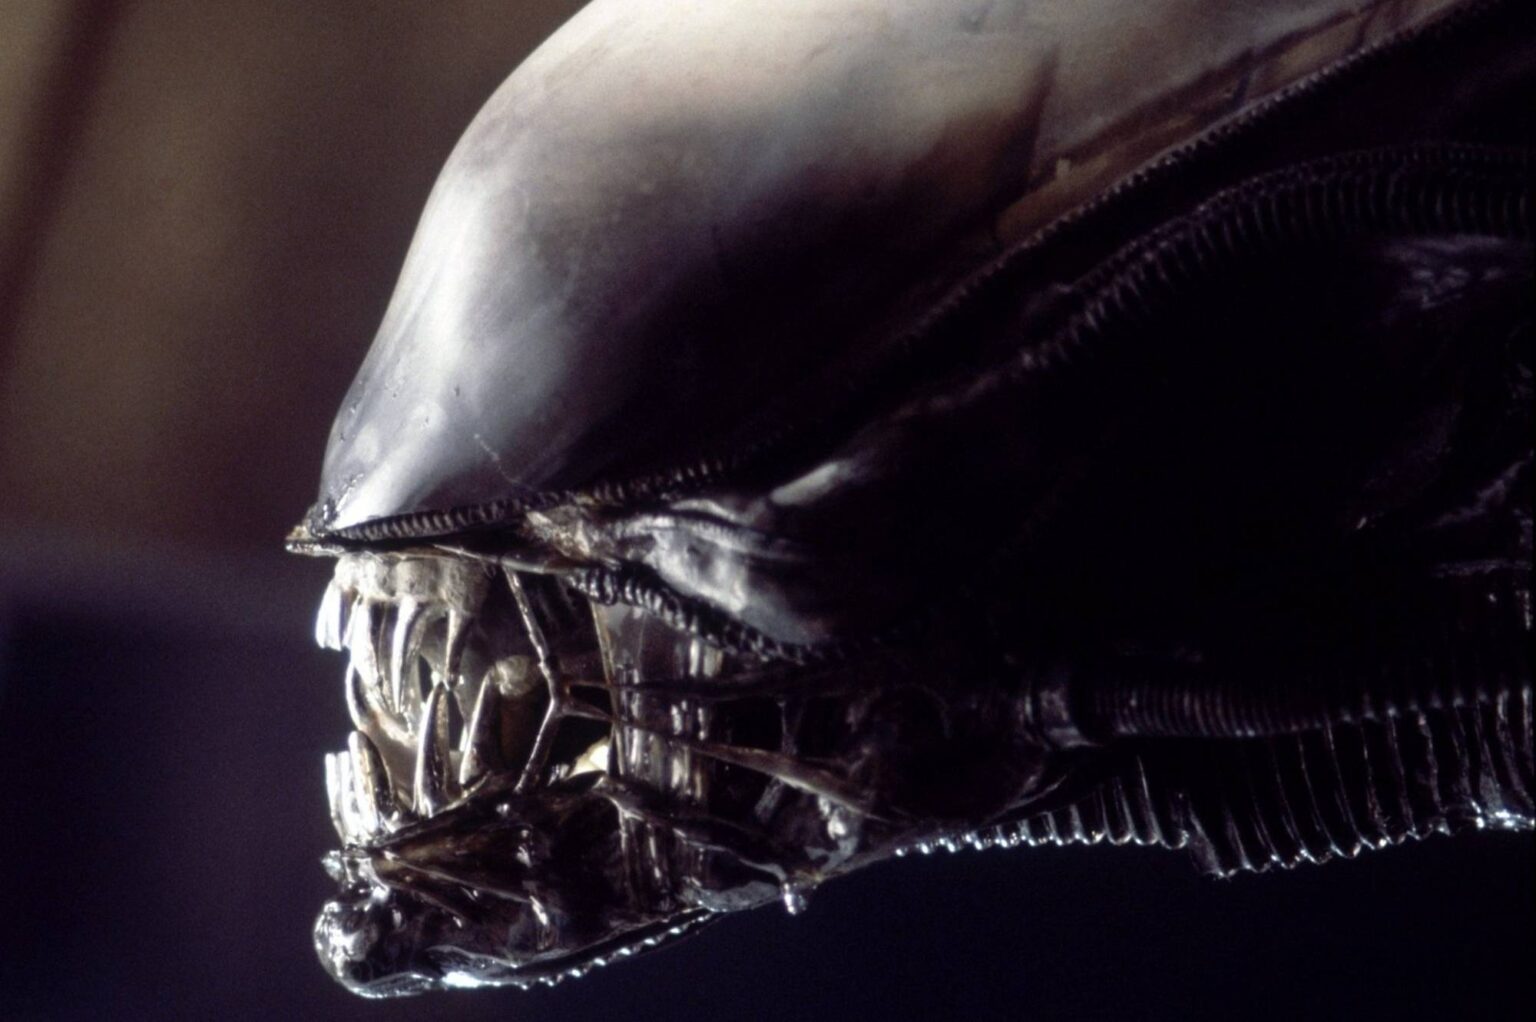 If you're a fan of the 'Alien' franchise, then you'll want to hear this news about the upcomming movies being planned.